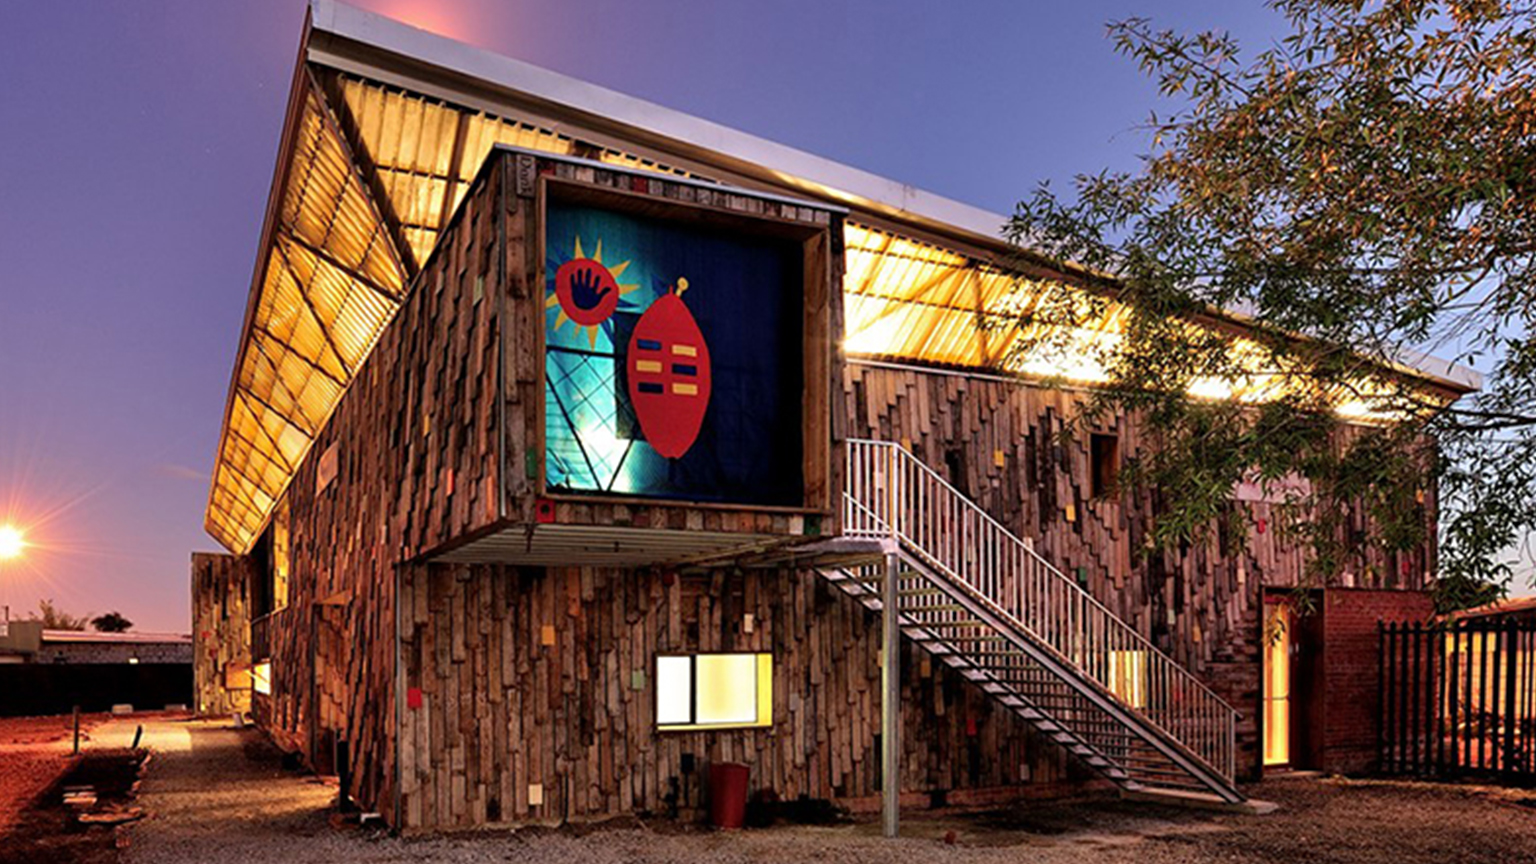 Exterior of the Design Develop Build project Guga S’Thebe Children’ Theater, Langa, Cape Town, South Africa 